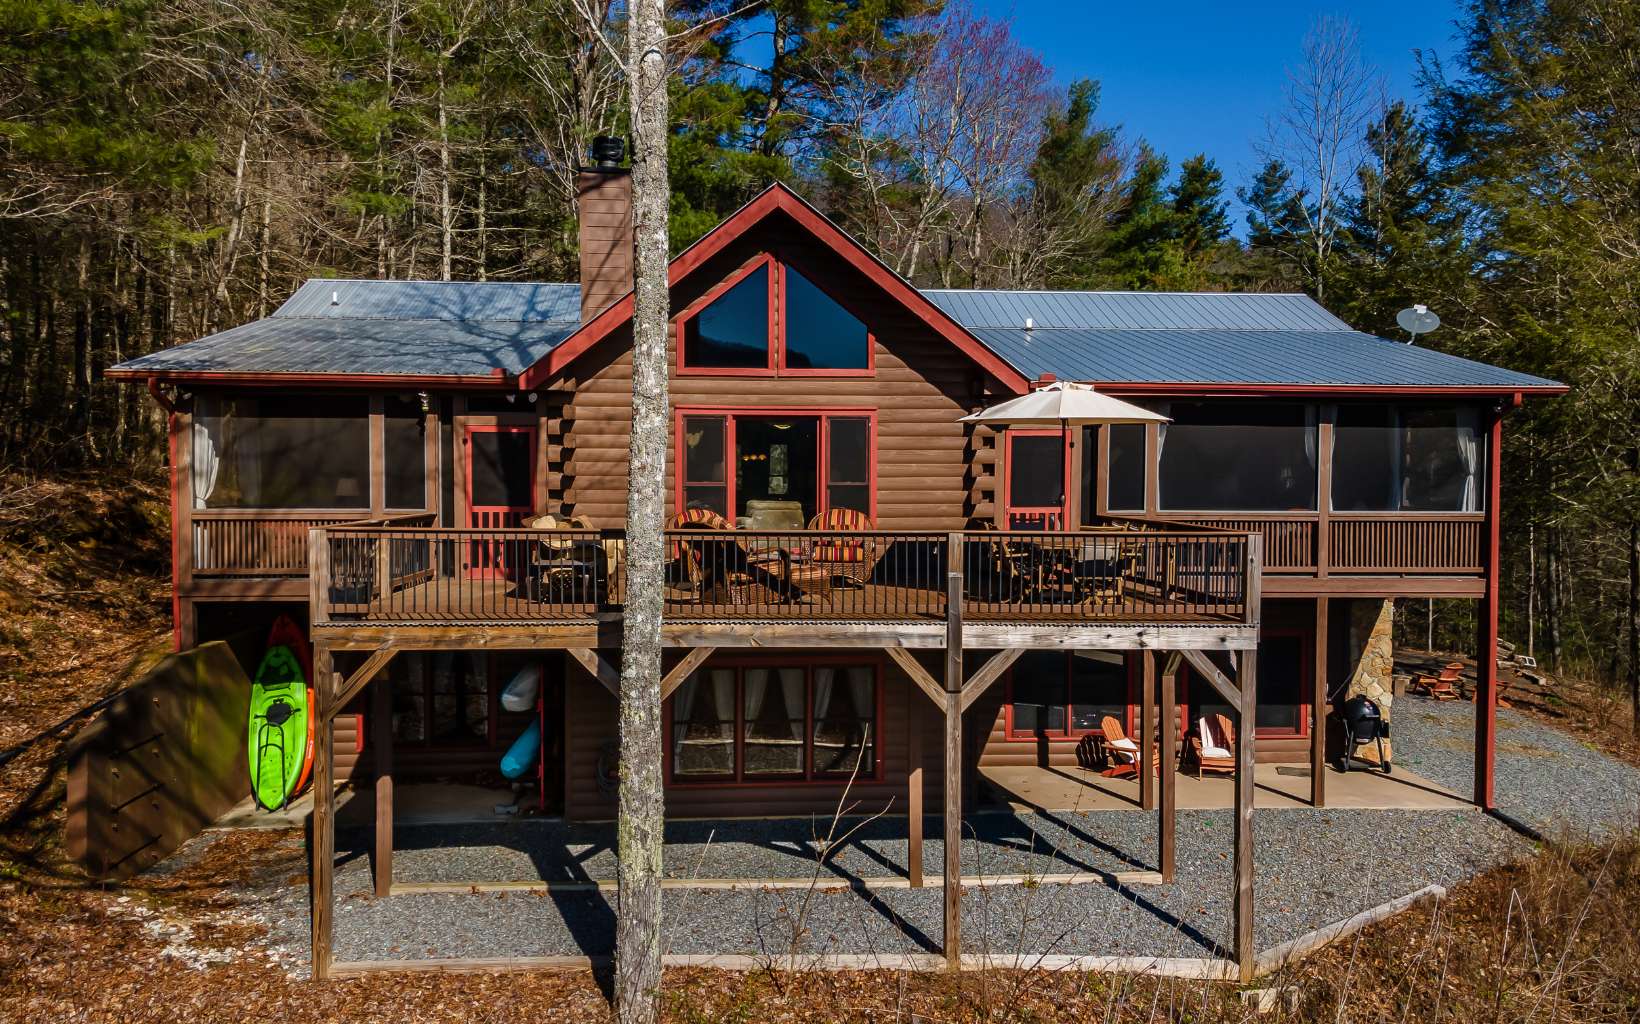 Looking for privacy, acreage, water frontage, and year-round views? How about an excuse to flip the SUV into 4WD/AWD and meander thru the hemlocks, rhododendron, and laurel to this well-maintained 4/3 cabin on 4.56 acres in the heart of 36,000 acres of Cohutta Wilderness? 357 ft of small creek frontage cascading thru the property to join the rushing, noisy waters of Fightingtown Creek below can be heard from any room in the house. On the main level, find an open floorplan w/master suite, 2BR w/shared BA, laundry, two screen porches, oversized deck perched above the crystal, and clear waters that originate in the Cohutta’s and sing to you year-round. All wood interior, plus fully finished basement with wet bar, additional BR/BA, “drive under” garage, and firepit. The driveway ispartially paved, but 4WD/AWD is required